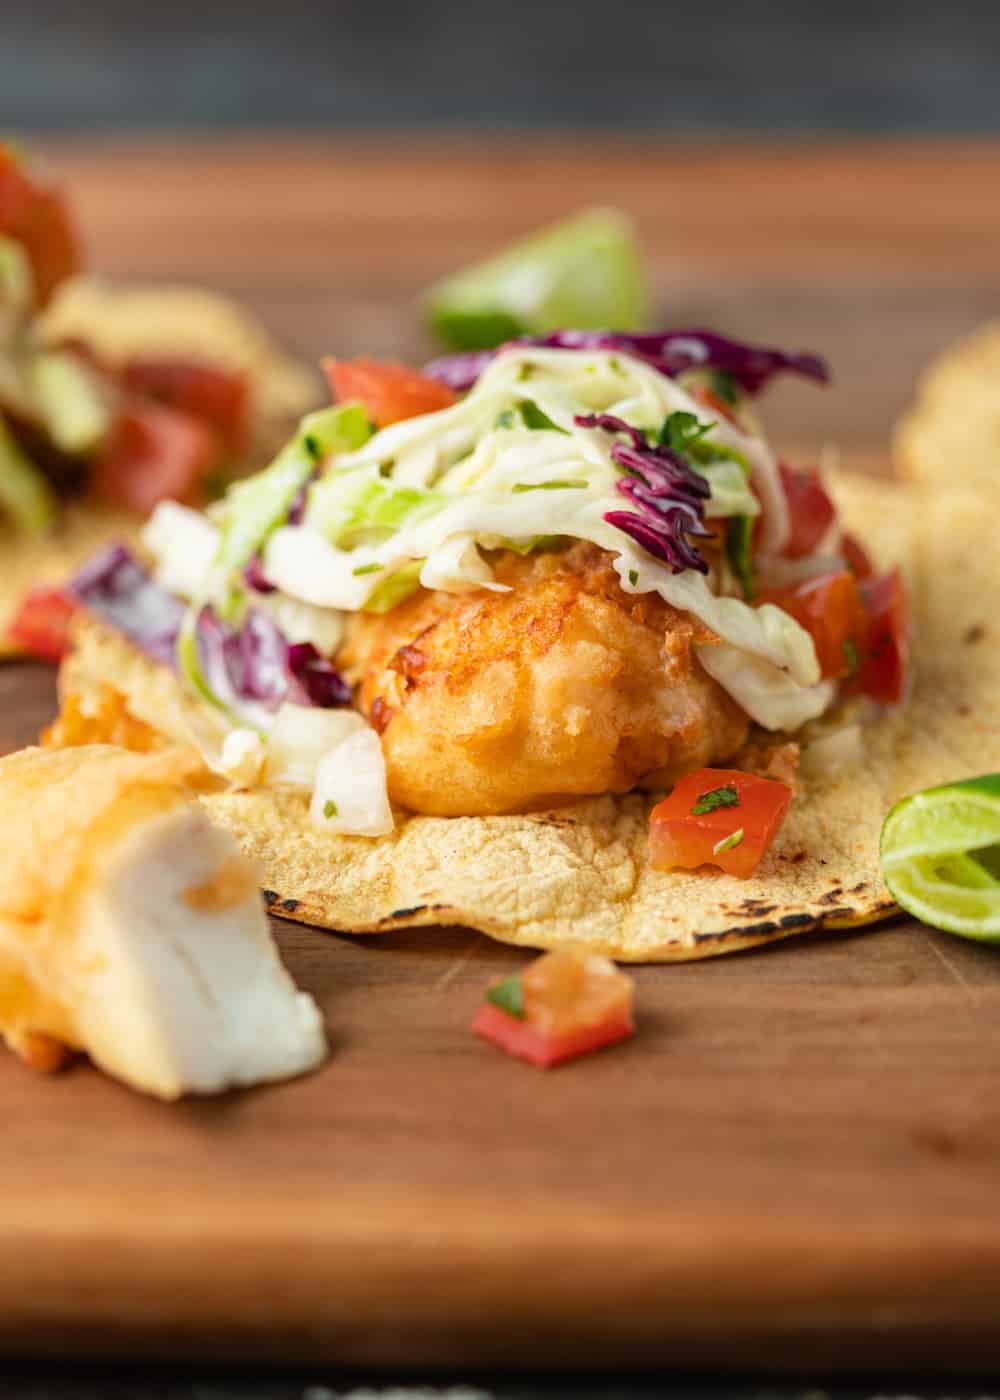 battered fish tacos on corn tortilla topped with crunchy purple slaw